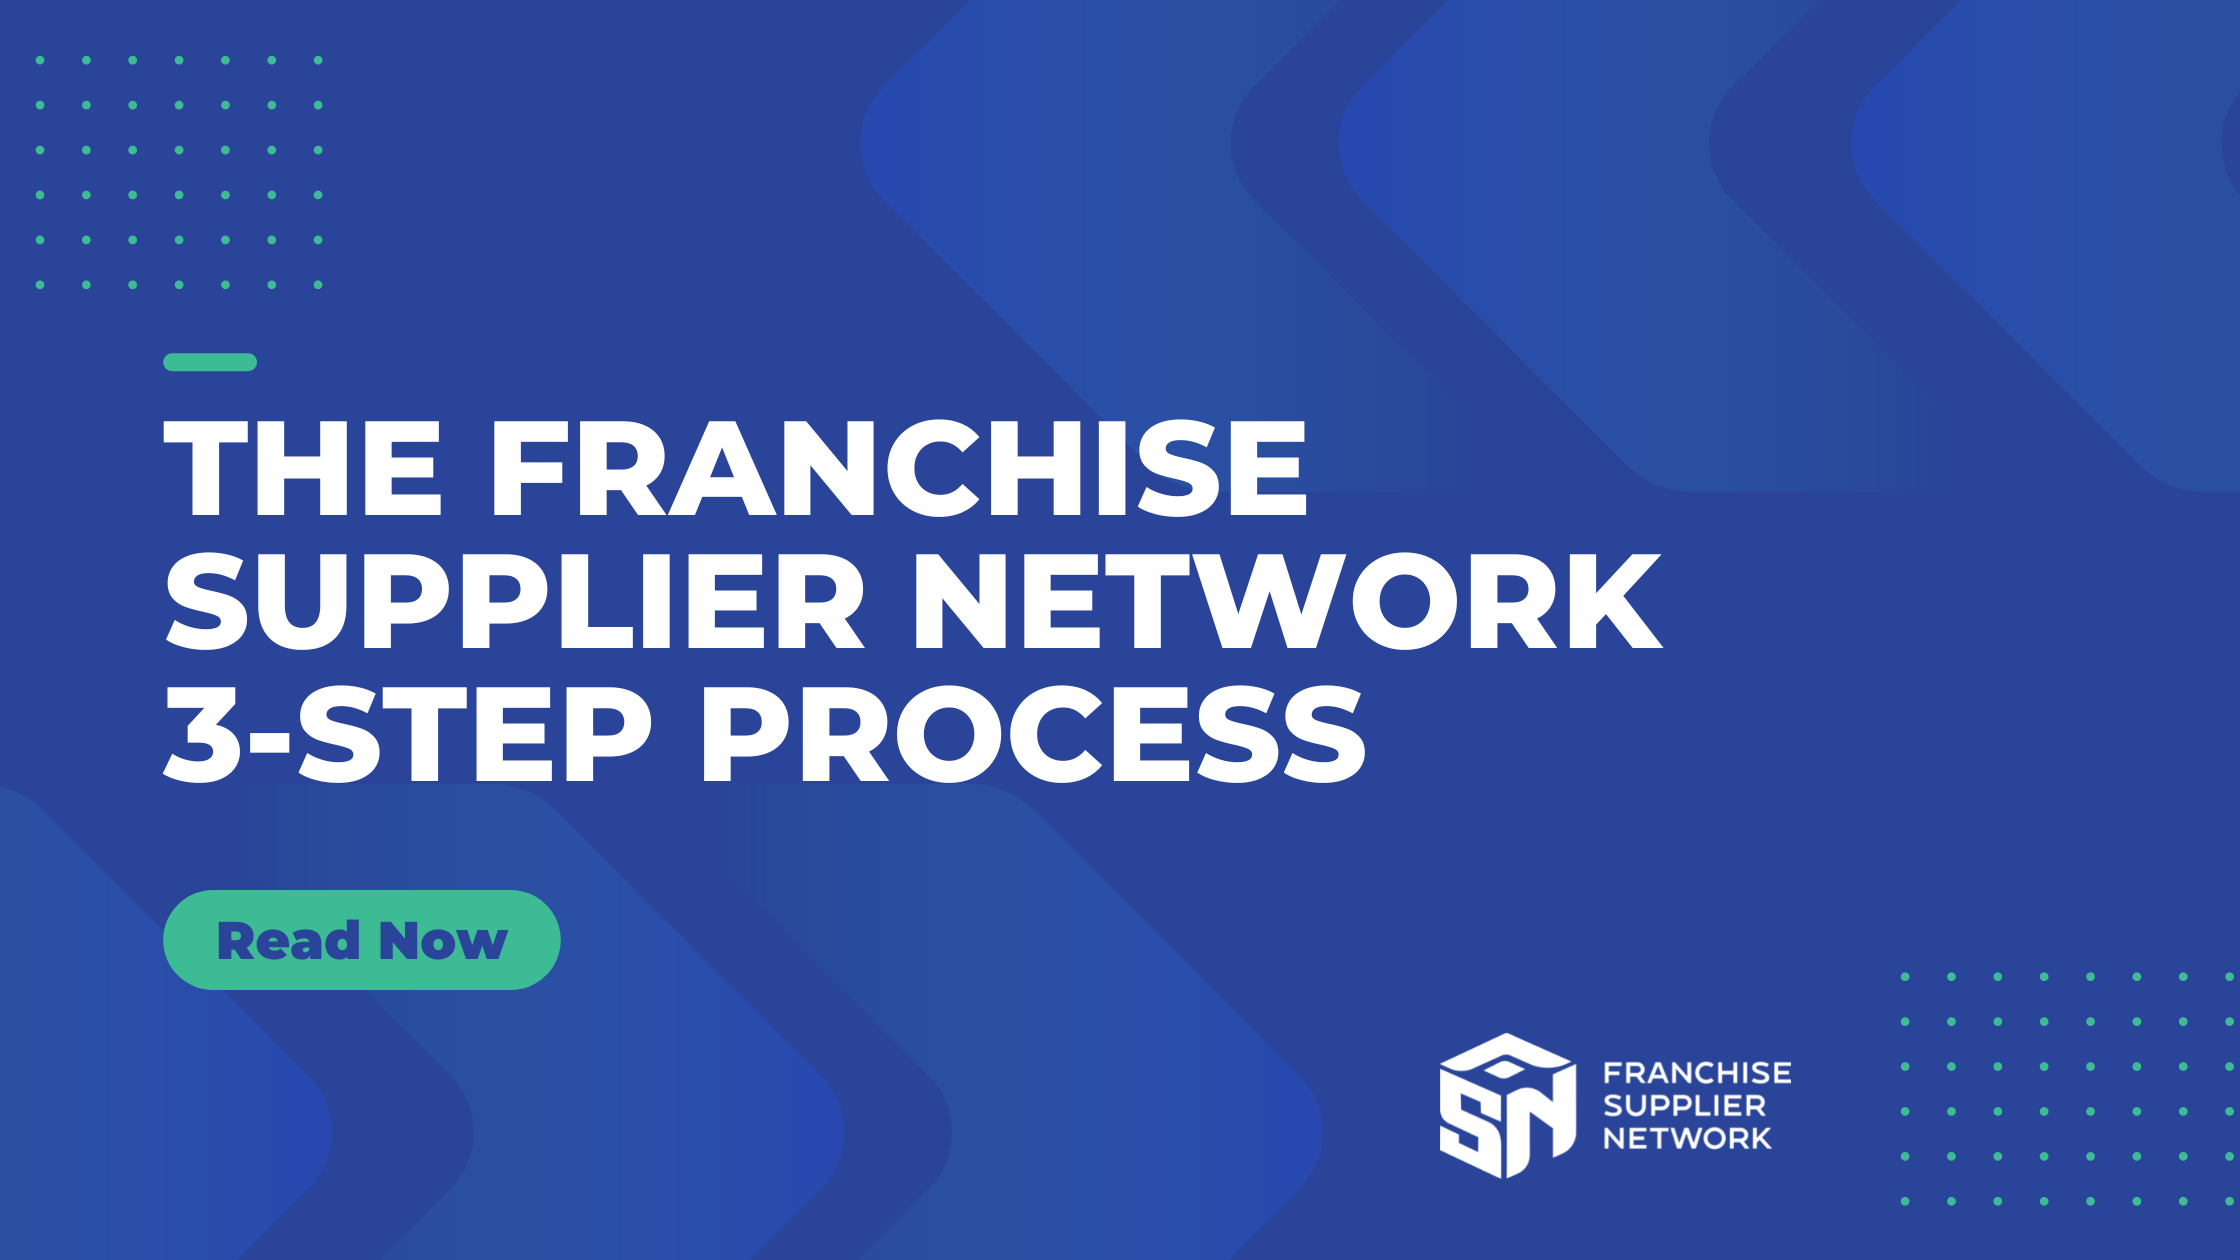 The Franchise Supplier Network 3-Step Process